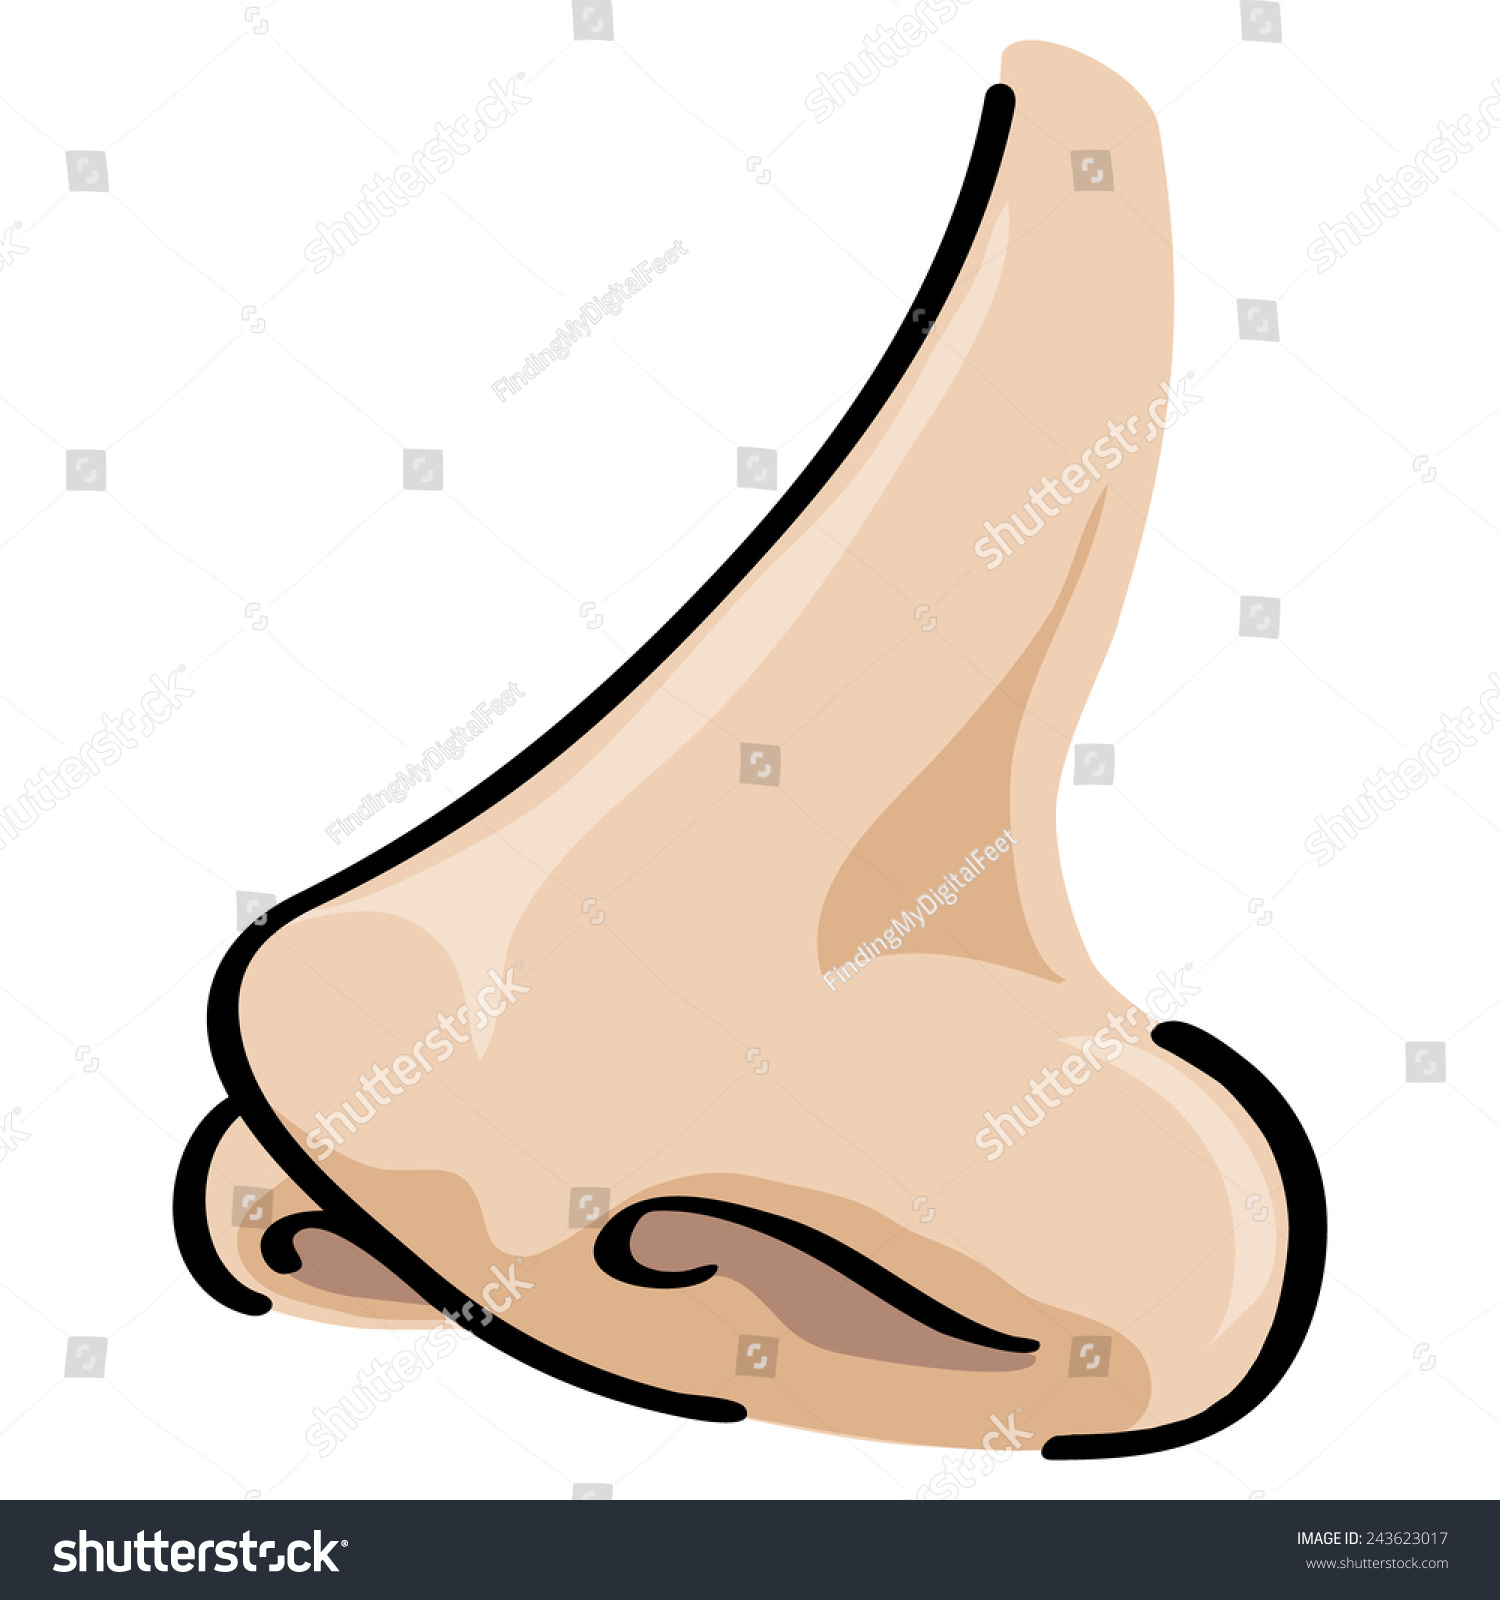 Shaded Nose Vector Cartoon Isolated - 243623017 : Shutterstock